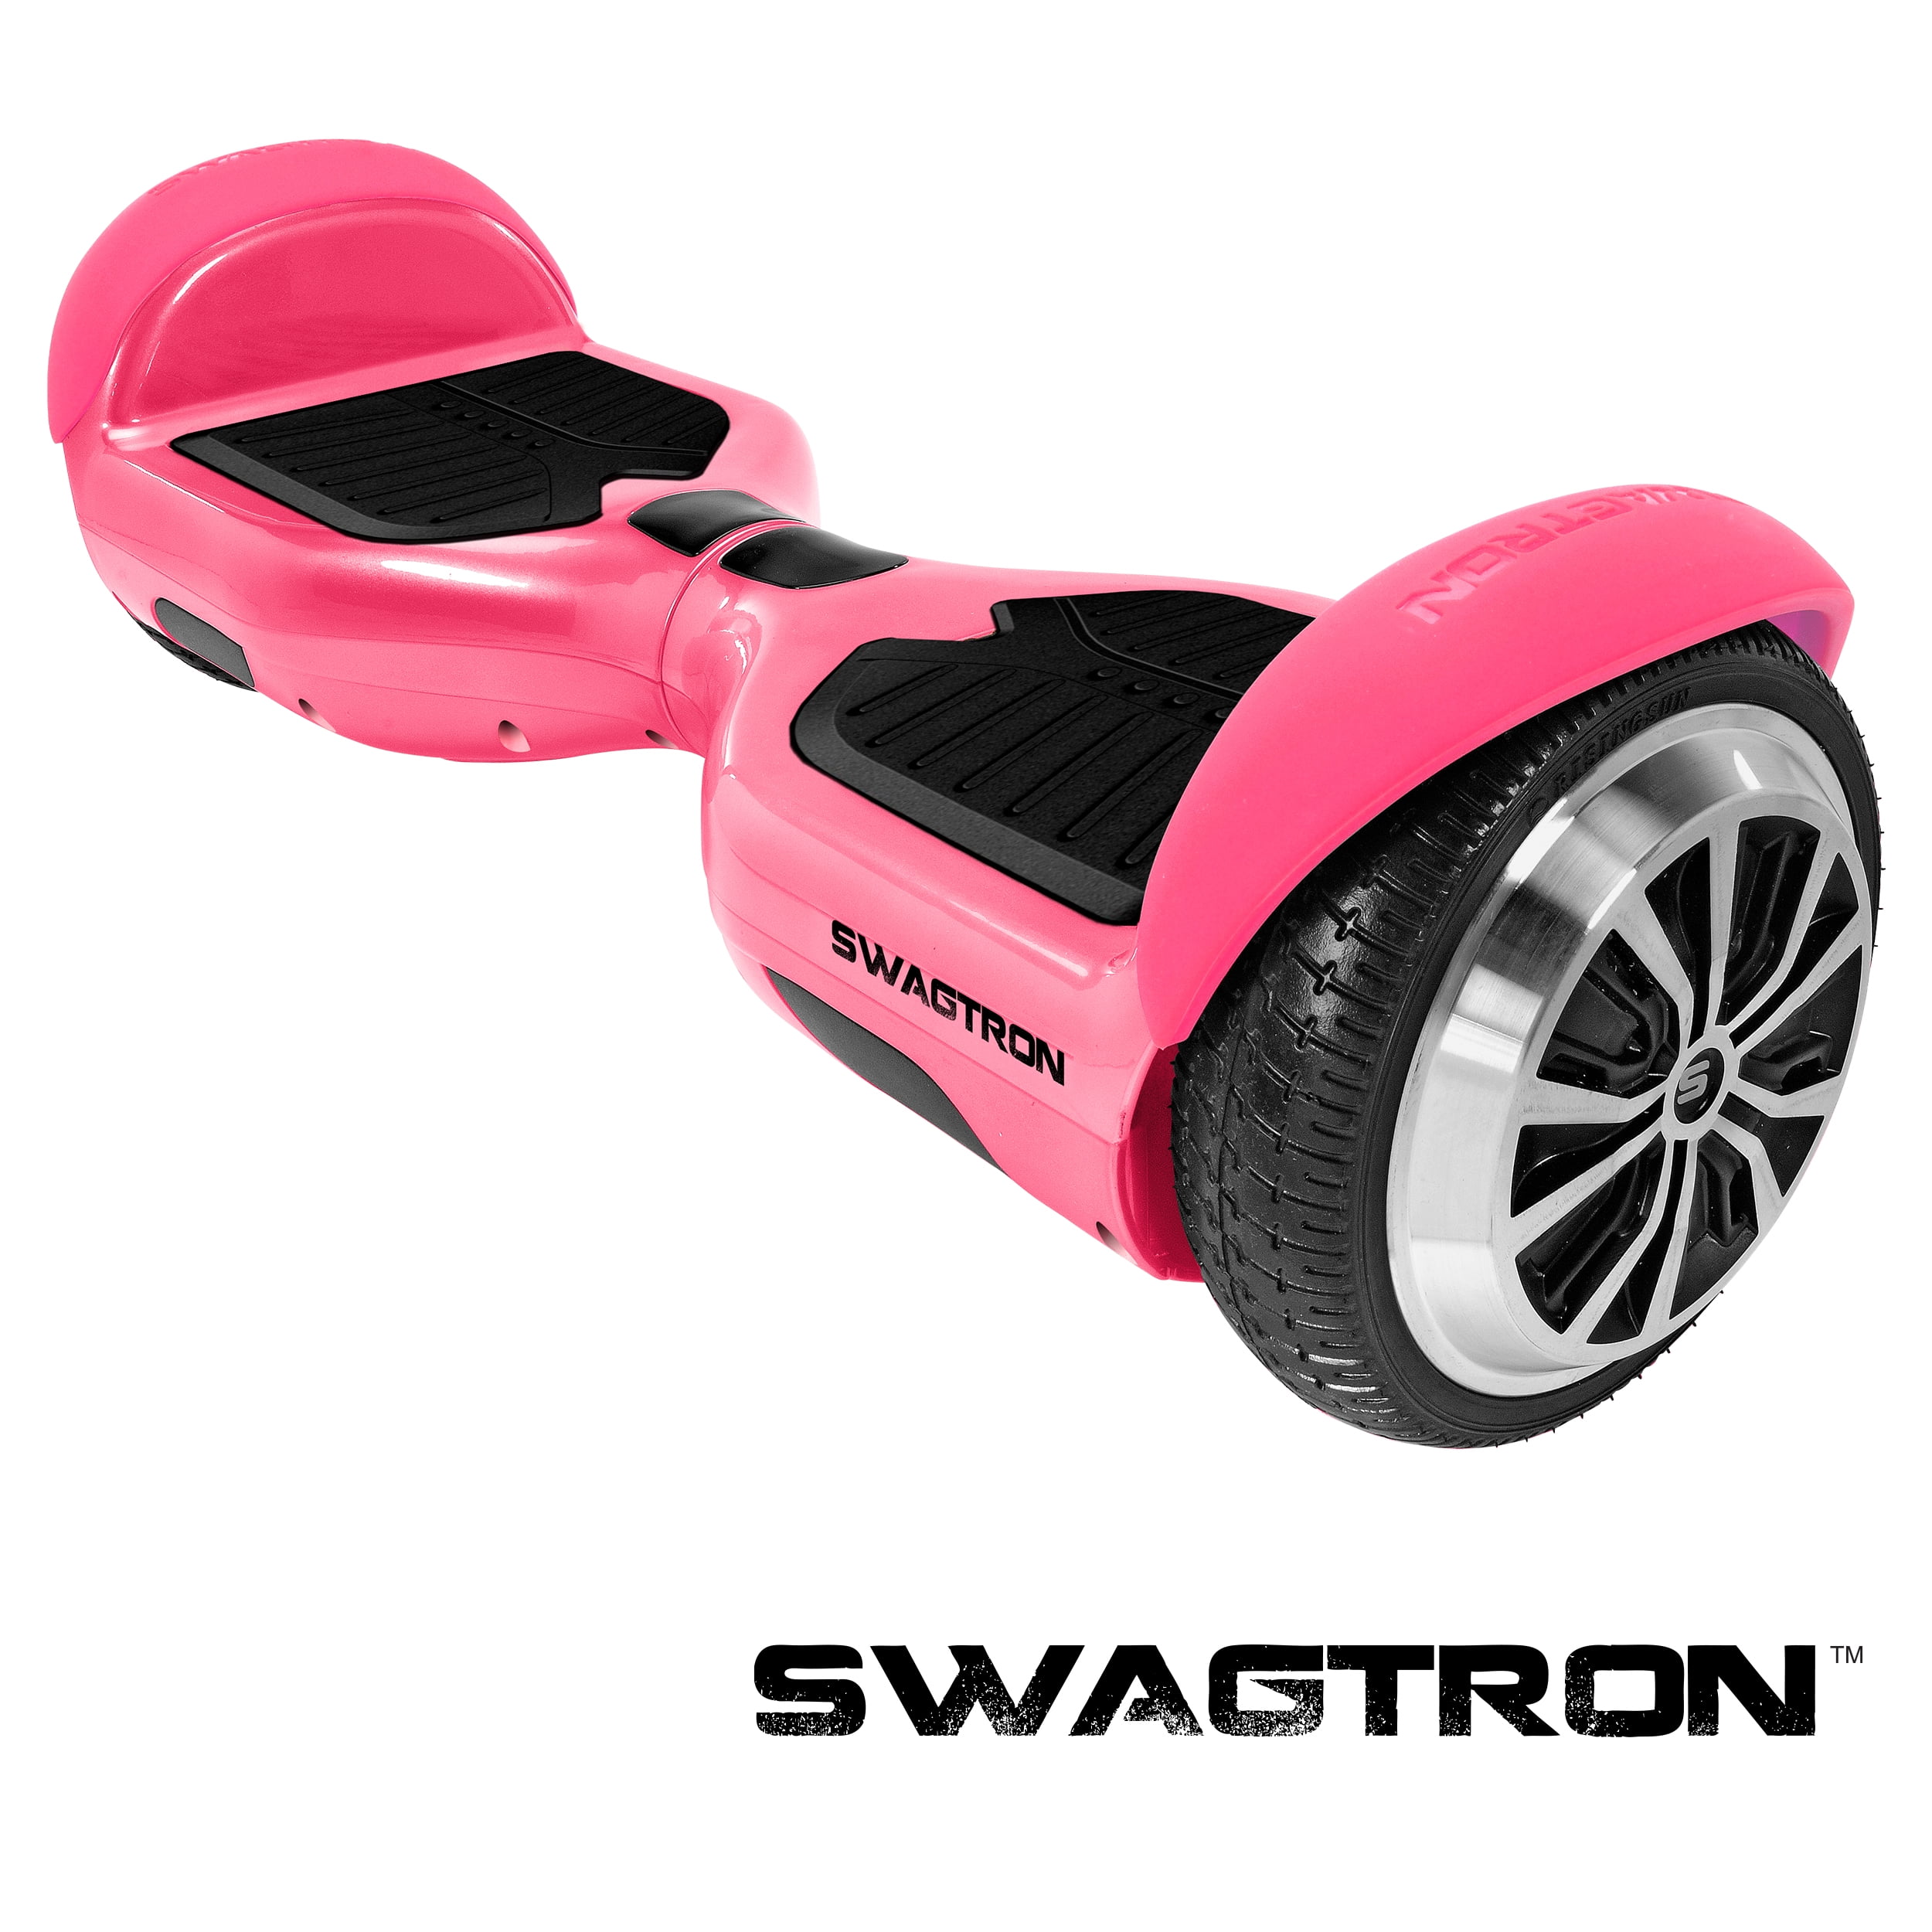 What Type of Pump Works on My SWAGTRON Hoverboard, Electric Bike